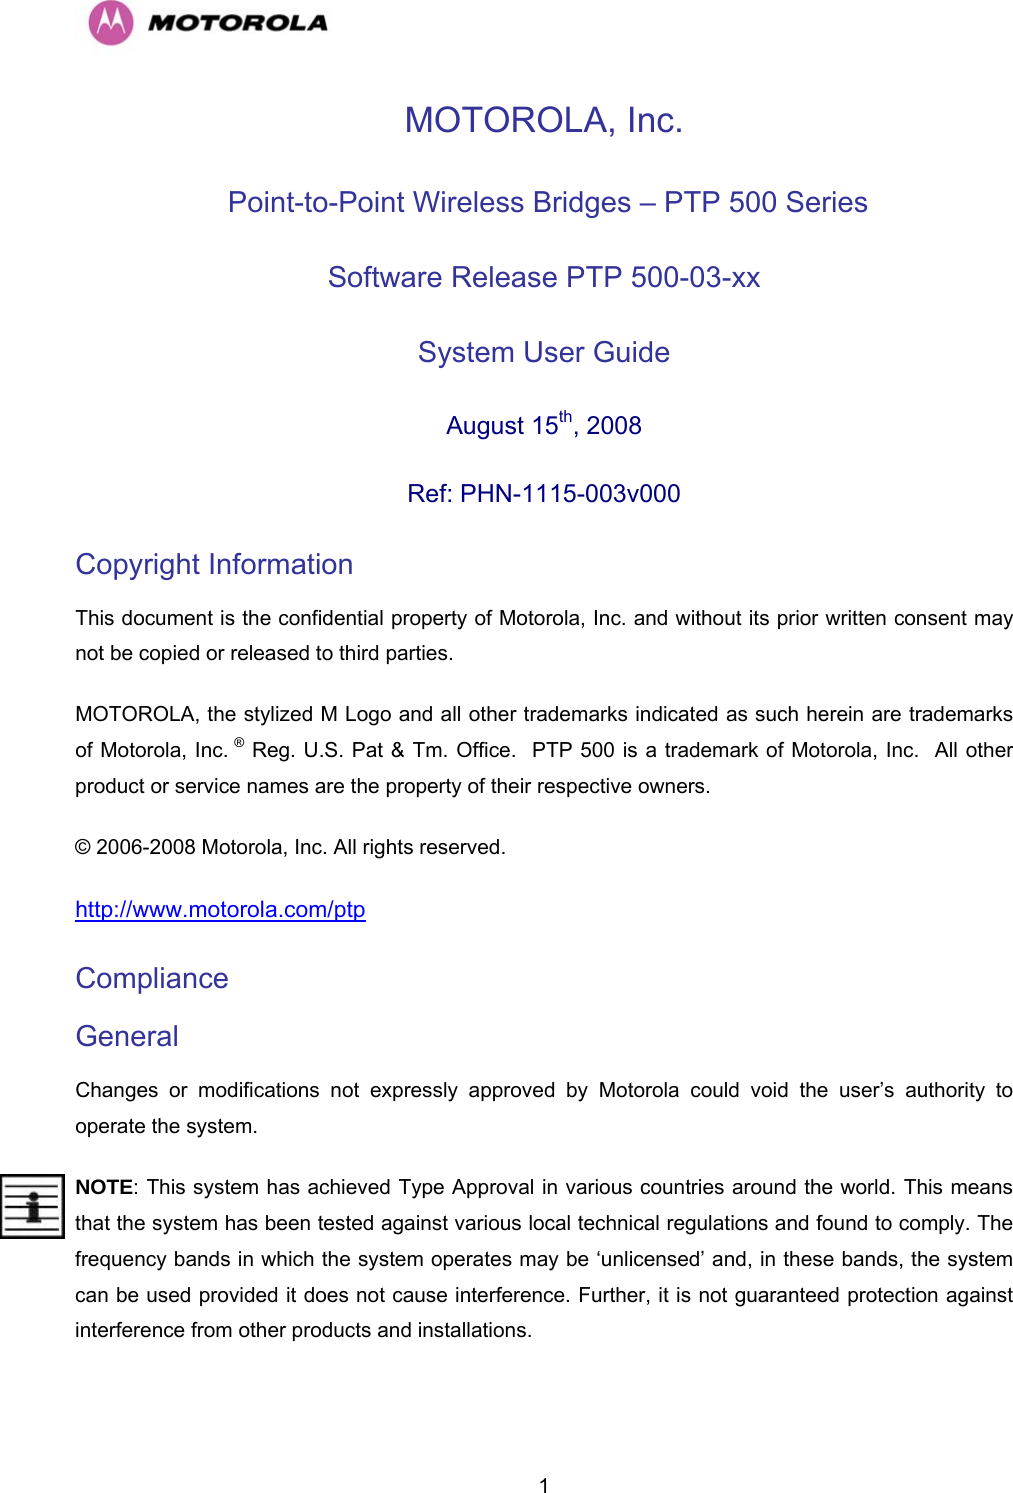   1MOTOROLA, Inc.  Point-to-Point Wireless Bridges – PTP 500 Series Software Release PTP 500-03-xx System User Guide  August 15th, 2008 Ref: PHN-1115-003v000 Copyright Information This document is the confidential property of Motorola, Inc. and without its prior written consent may not be copied or released to third parties.  MOTOROLA, the stylized M Logo and all other trademarks indicated as such herein are trademarks of Motorola, Inc. ® Reg. U.S. Pat &amp; Tm. Office.  PTP 500 is a trademark of Motorola, Inc.  All other product or service names are the property of their respective owners. © 2006-2008 Motorola, Inc. All rights reserved. http://www.motorola.com/ptp Compliance  General Changes or modifications not expressly approved by Motorola could void the user’s authority to operate the system.  NOTE: This system has achieved Type Approval in various countries around the world. This means that the system has been tested against various local technical regulations and found to comply. The frequency bands in which the system operates may be ‘unlicensed’ and, in these bands, the system can be used provided it does not cause interference. Further, it is not guaranteed protection against interference from other products and installations. 